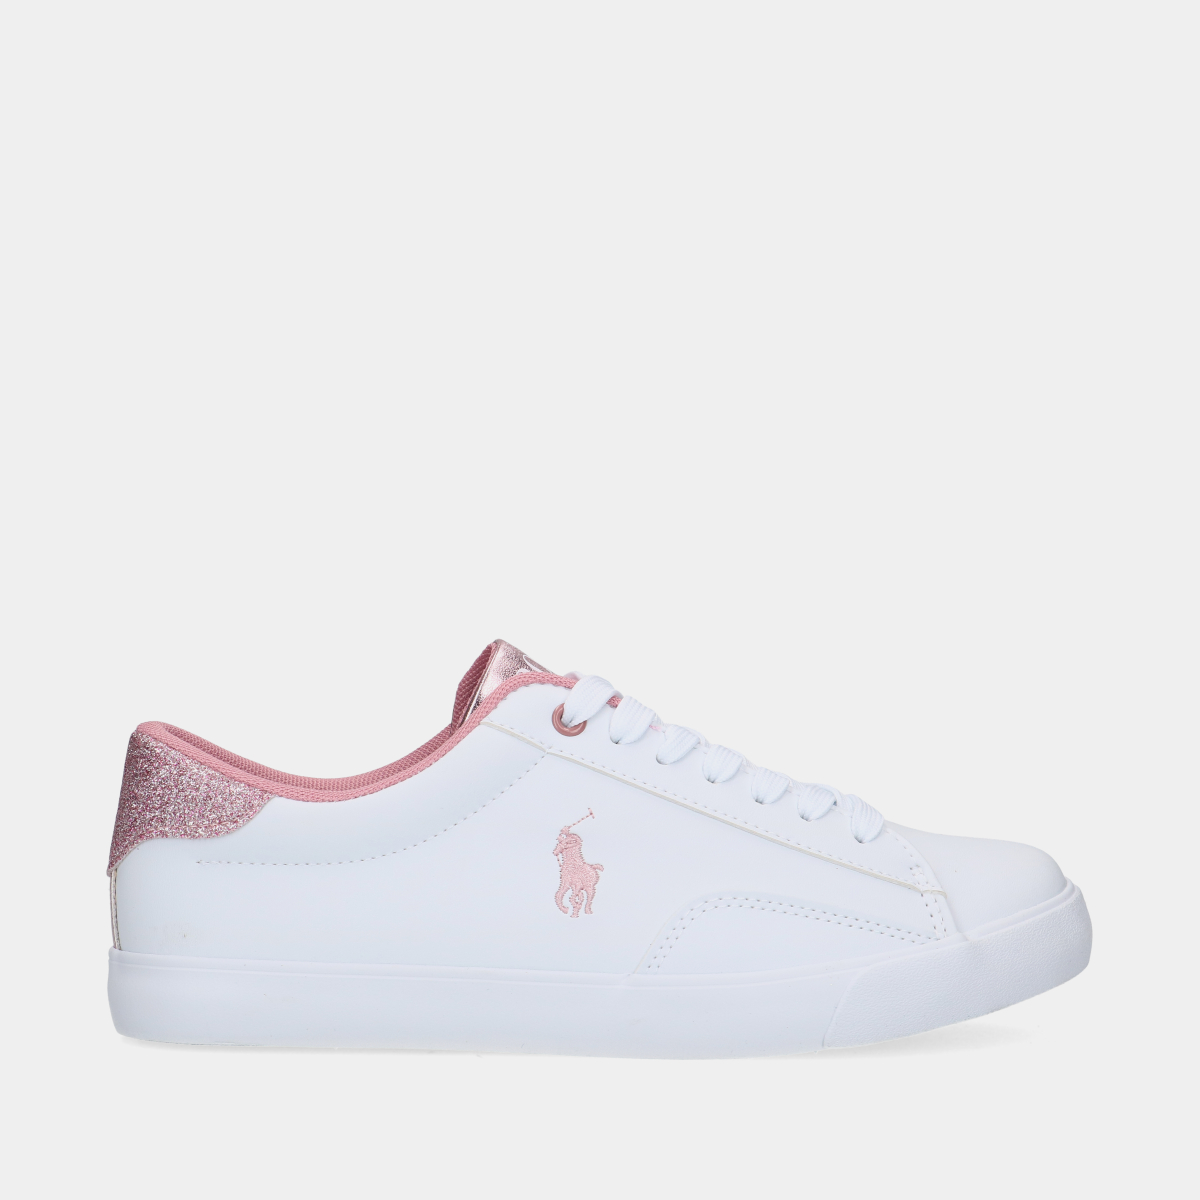 Polo Ralph Lauren Theron V White / Pink kinder sneakers
